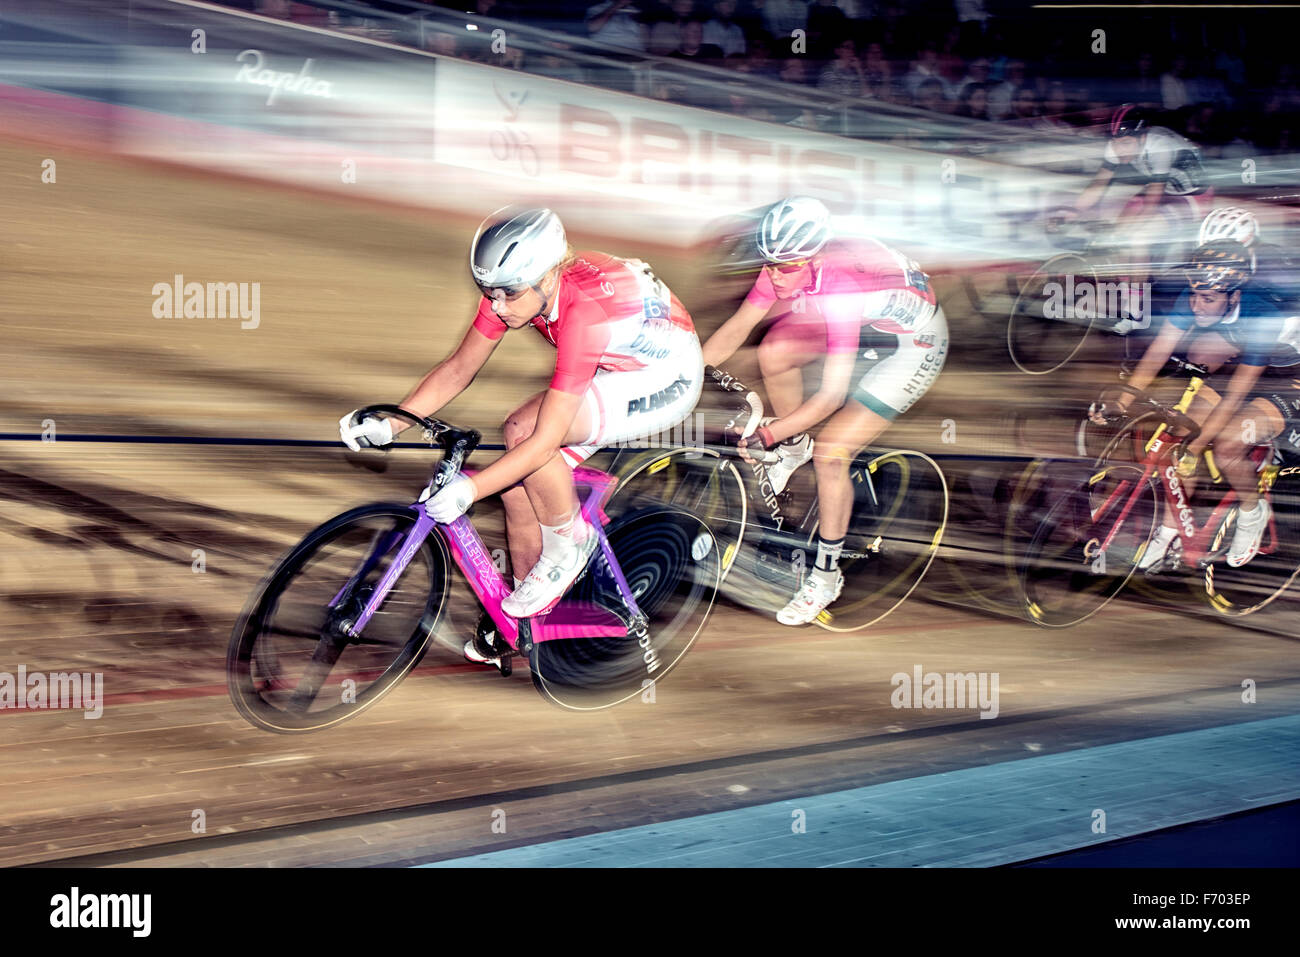 Malgorzata Wojtyra leads the field at the London Six Day cycling event at Lee Valley Velopark, London, UK, on 22 October 2015. Stock Photo